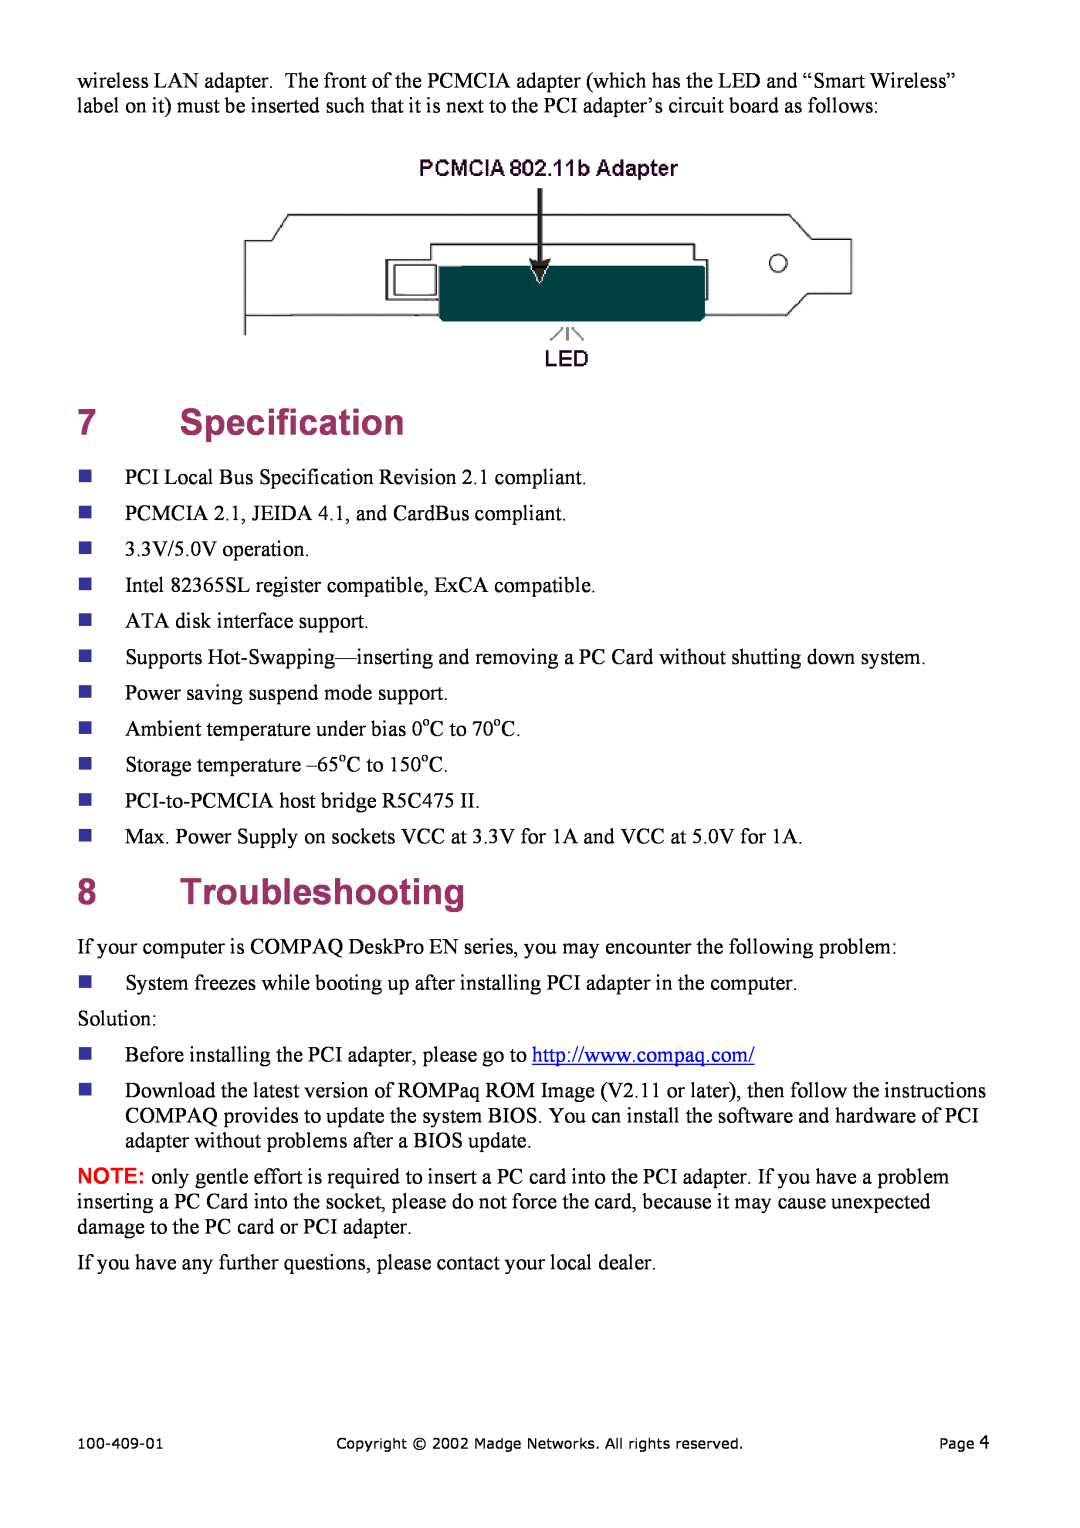 Madge Networks 802.11B (95-20) manual Specification, Troubleshooting 